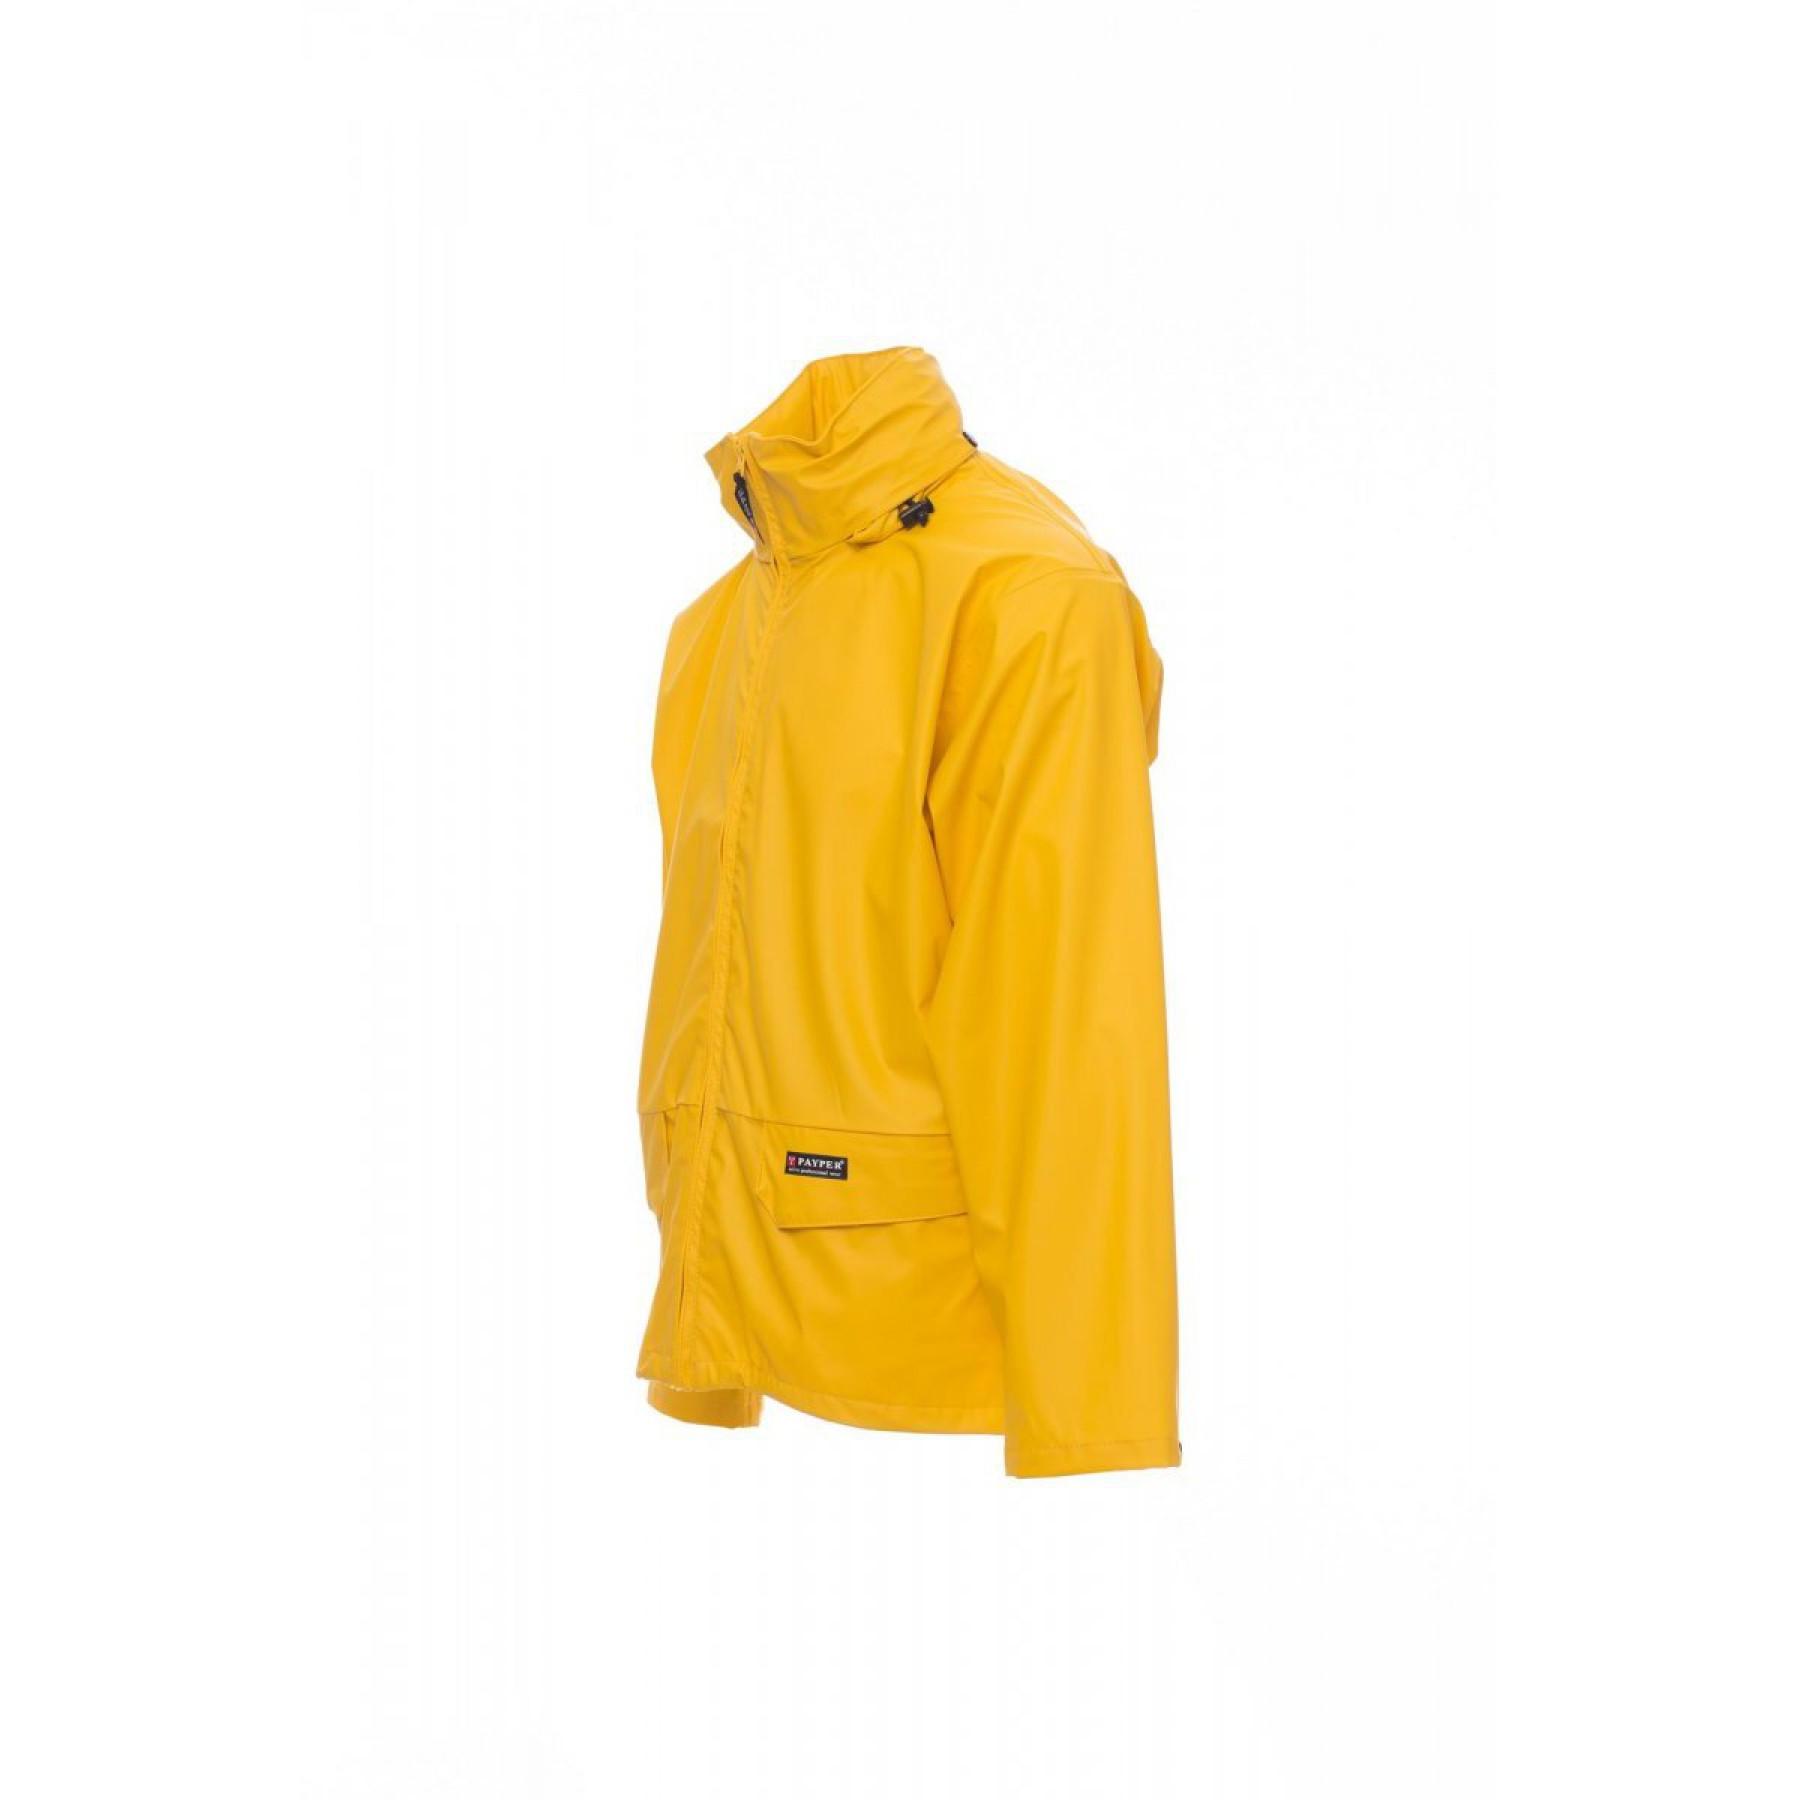 Chaqueta impermeable Payper Dry-jacket